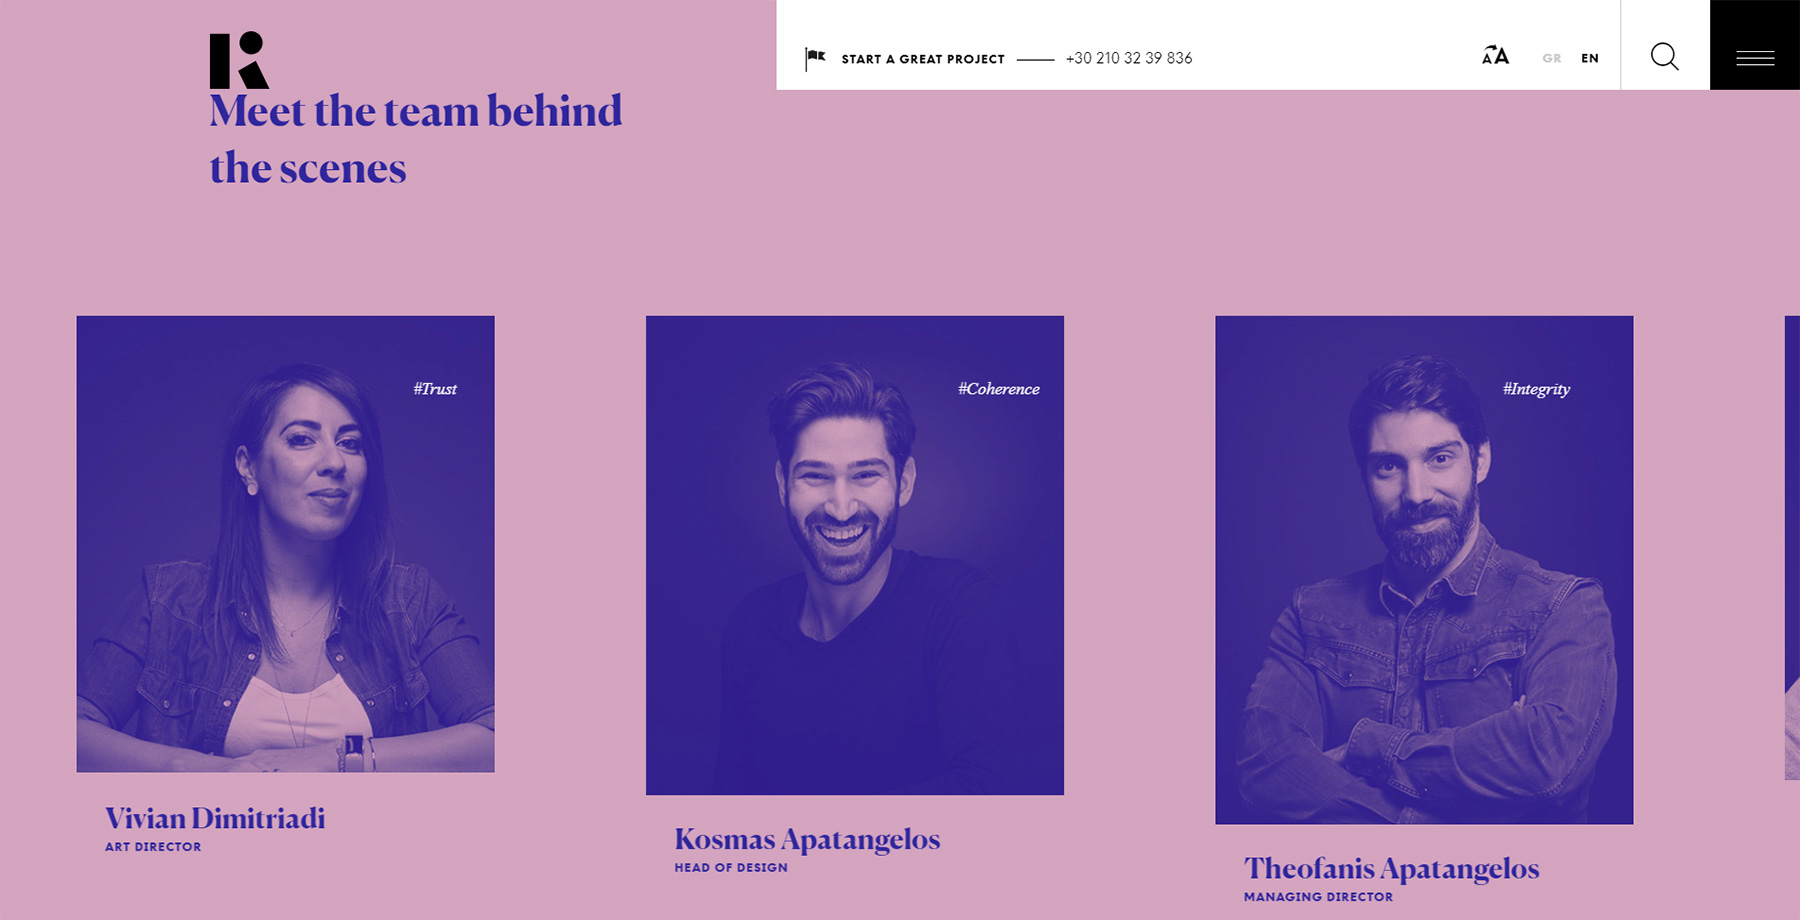 Kommigraphics - Website of the Day